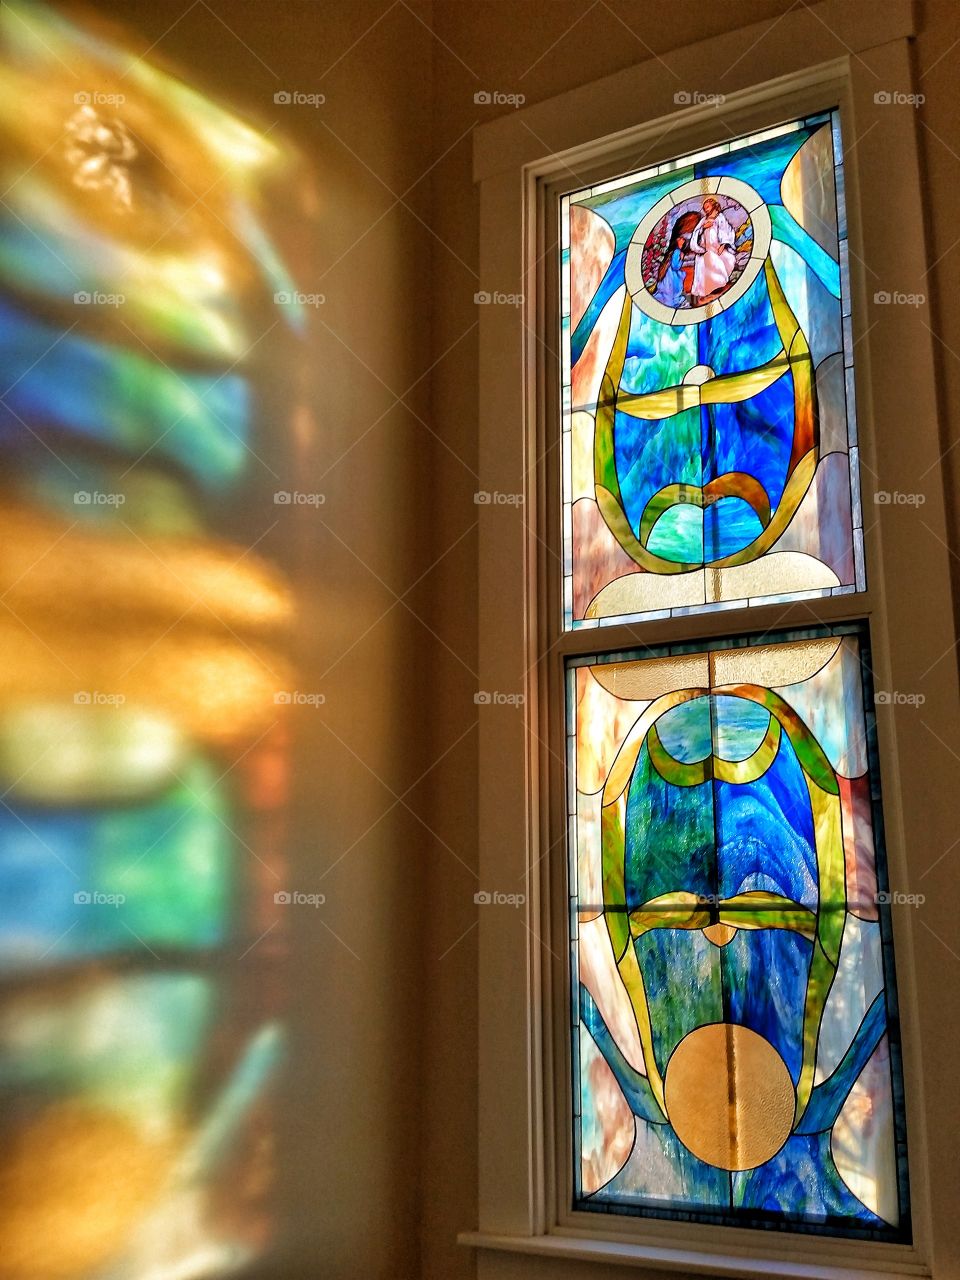 Sun shining through a stained glass window.